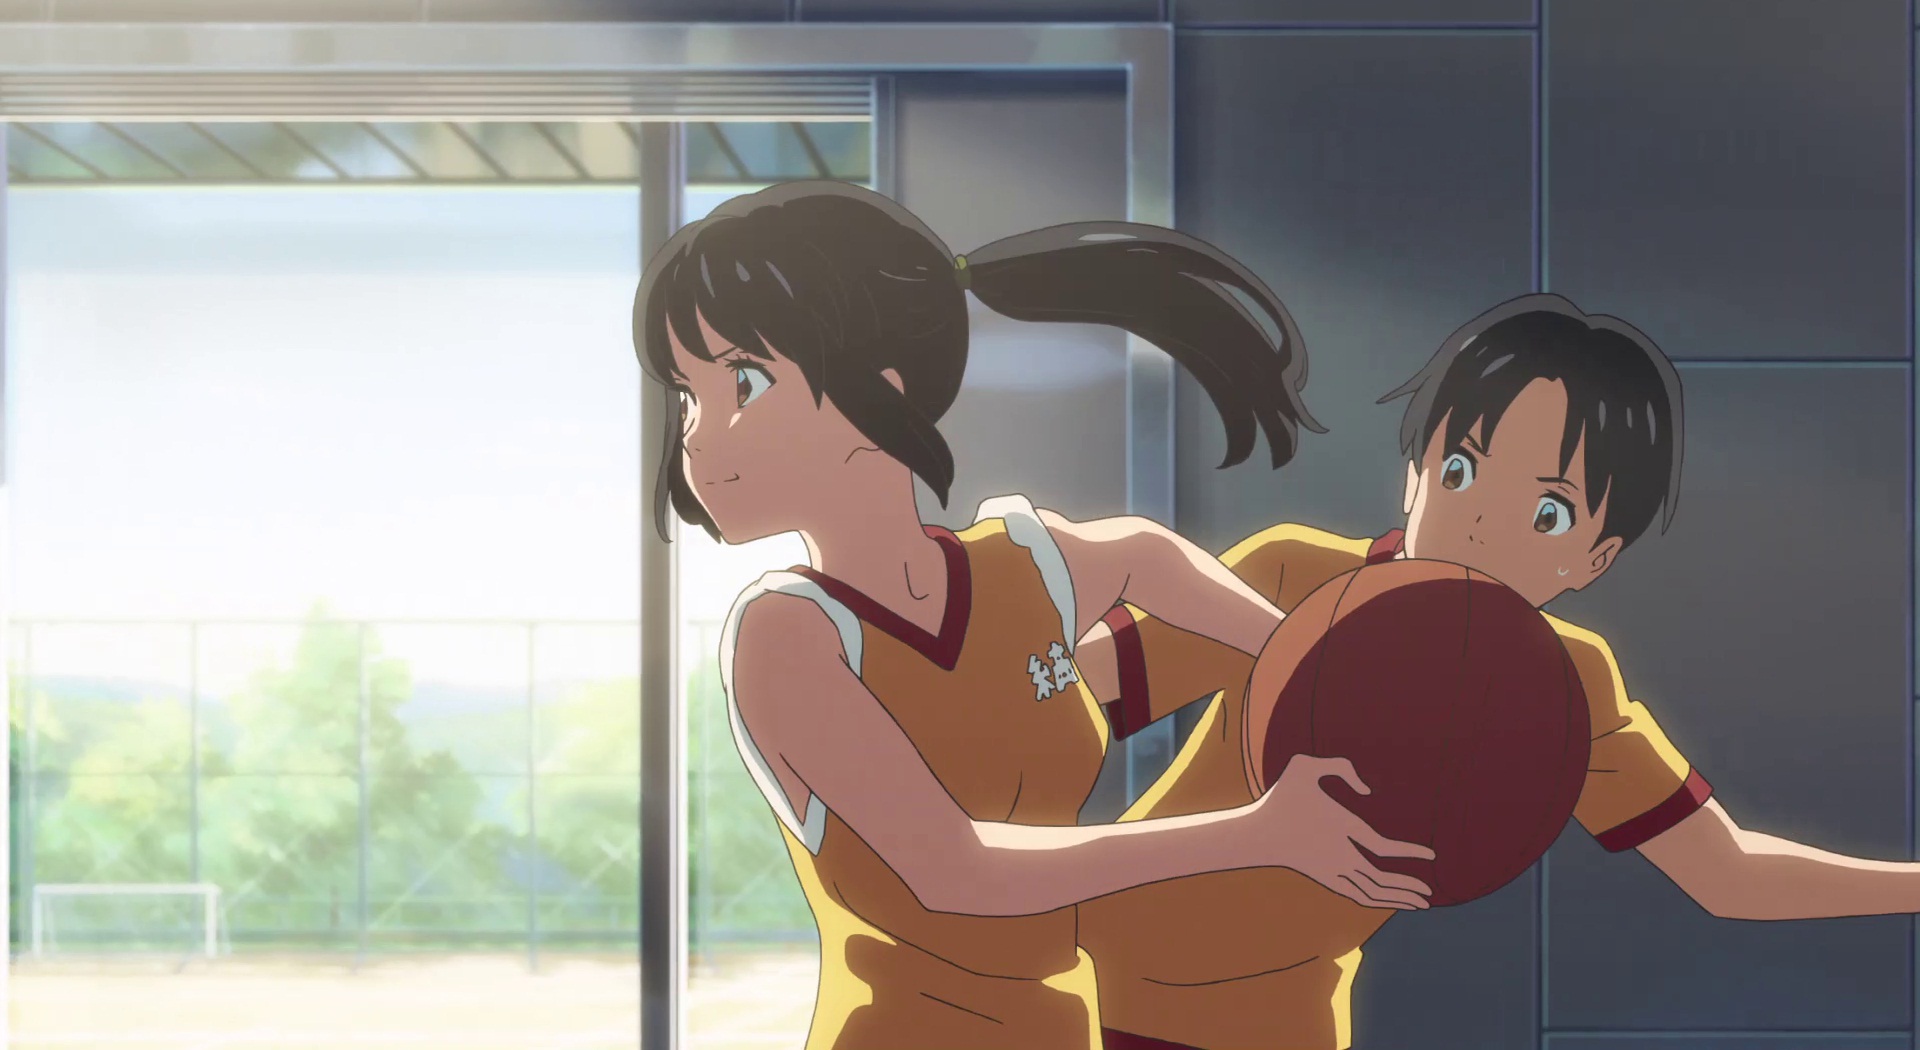 Scene from the anime feature film 'Your Name'. 